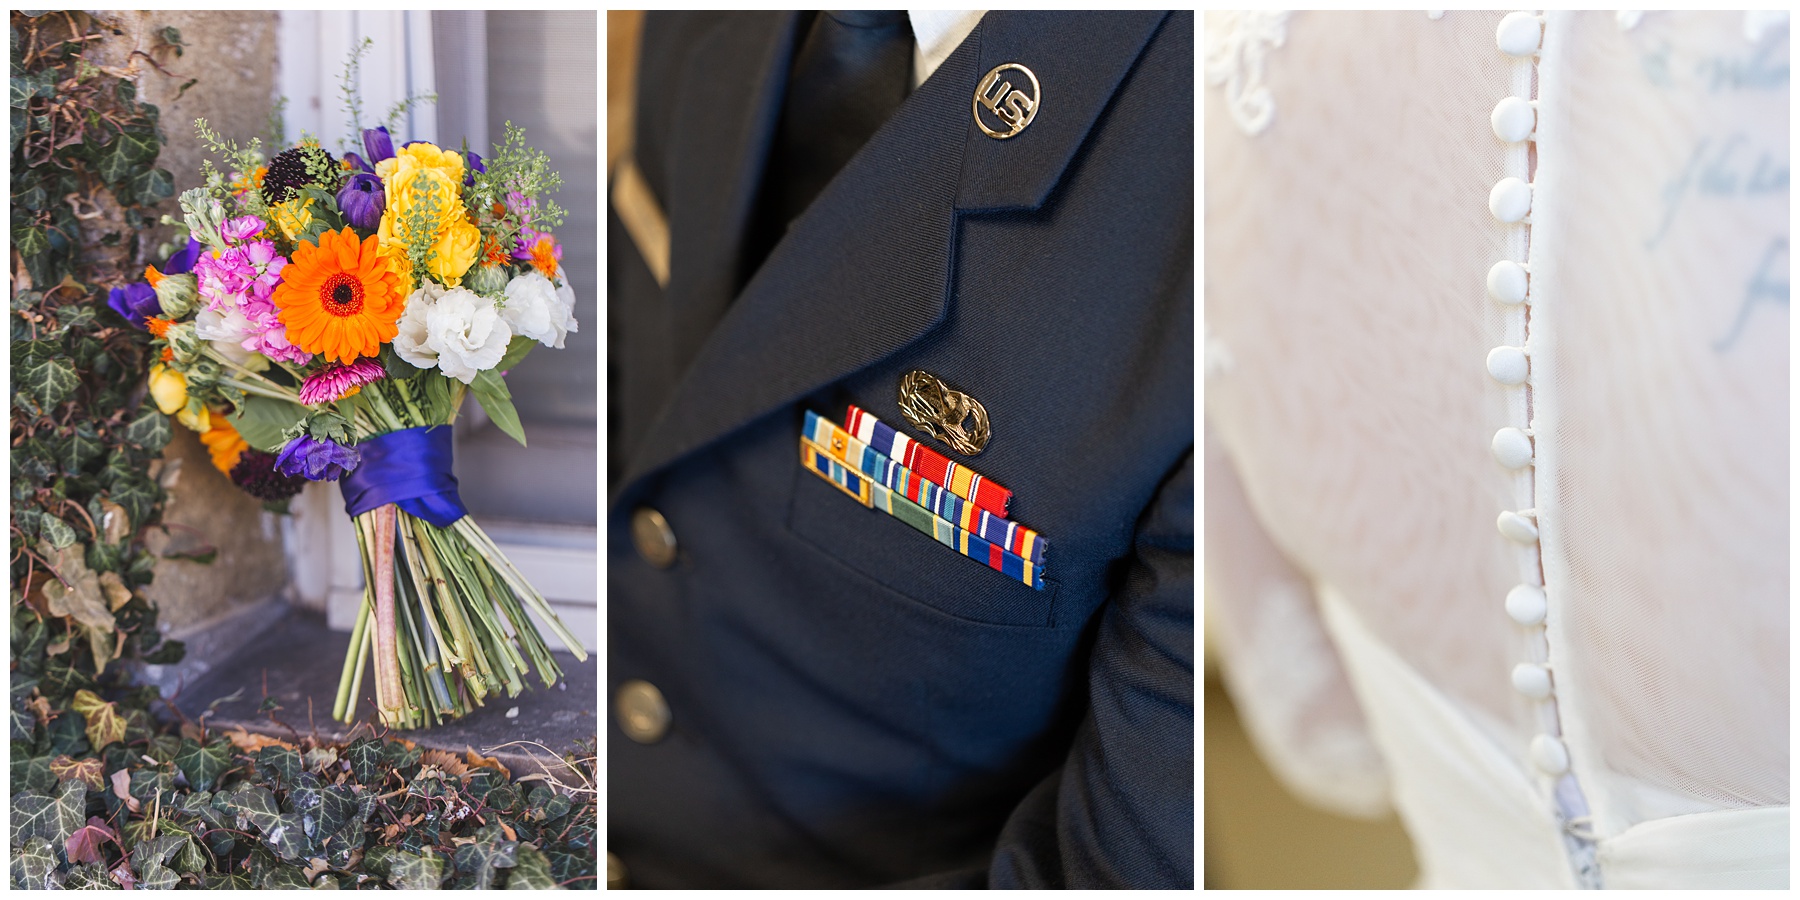 Wedding bouquet with military uniform and wedding dress